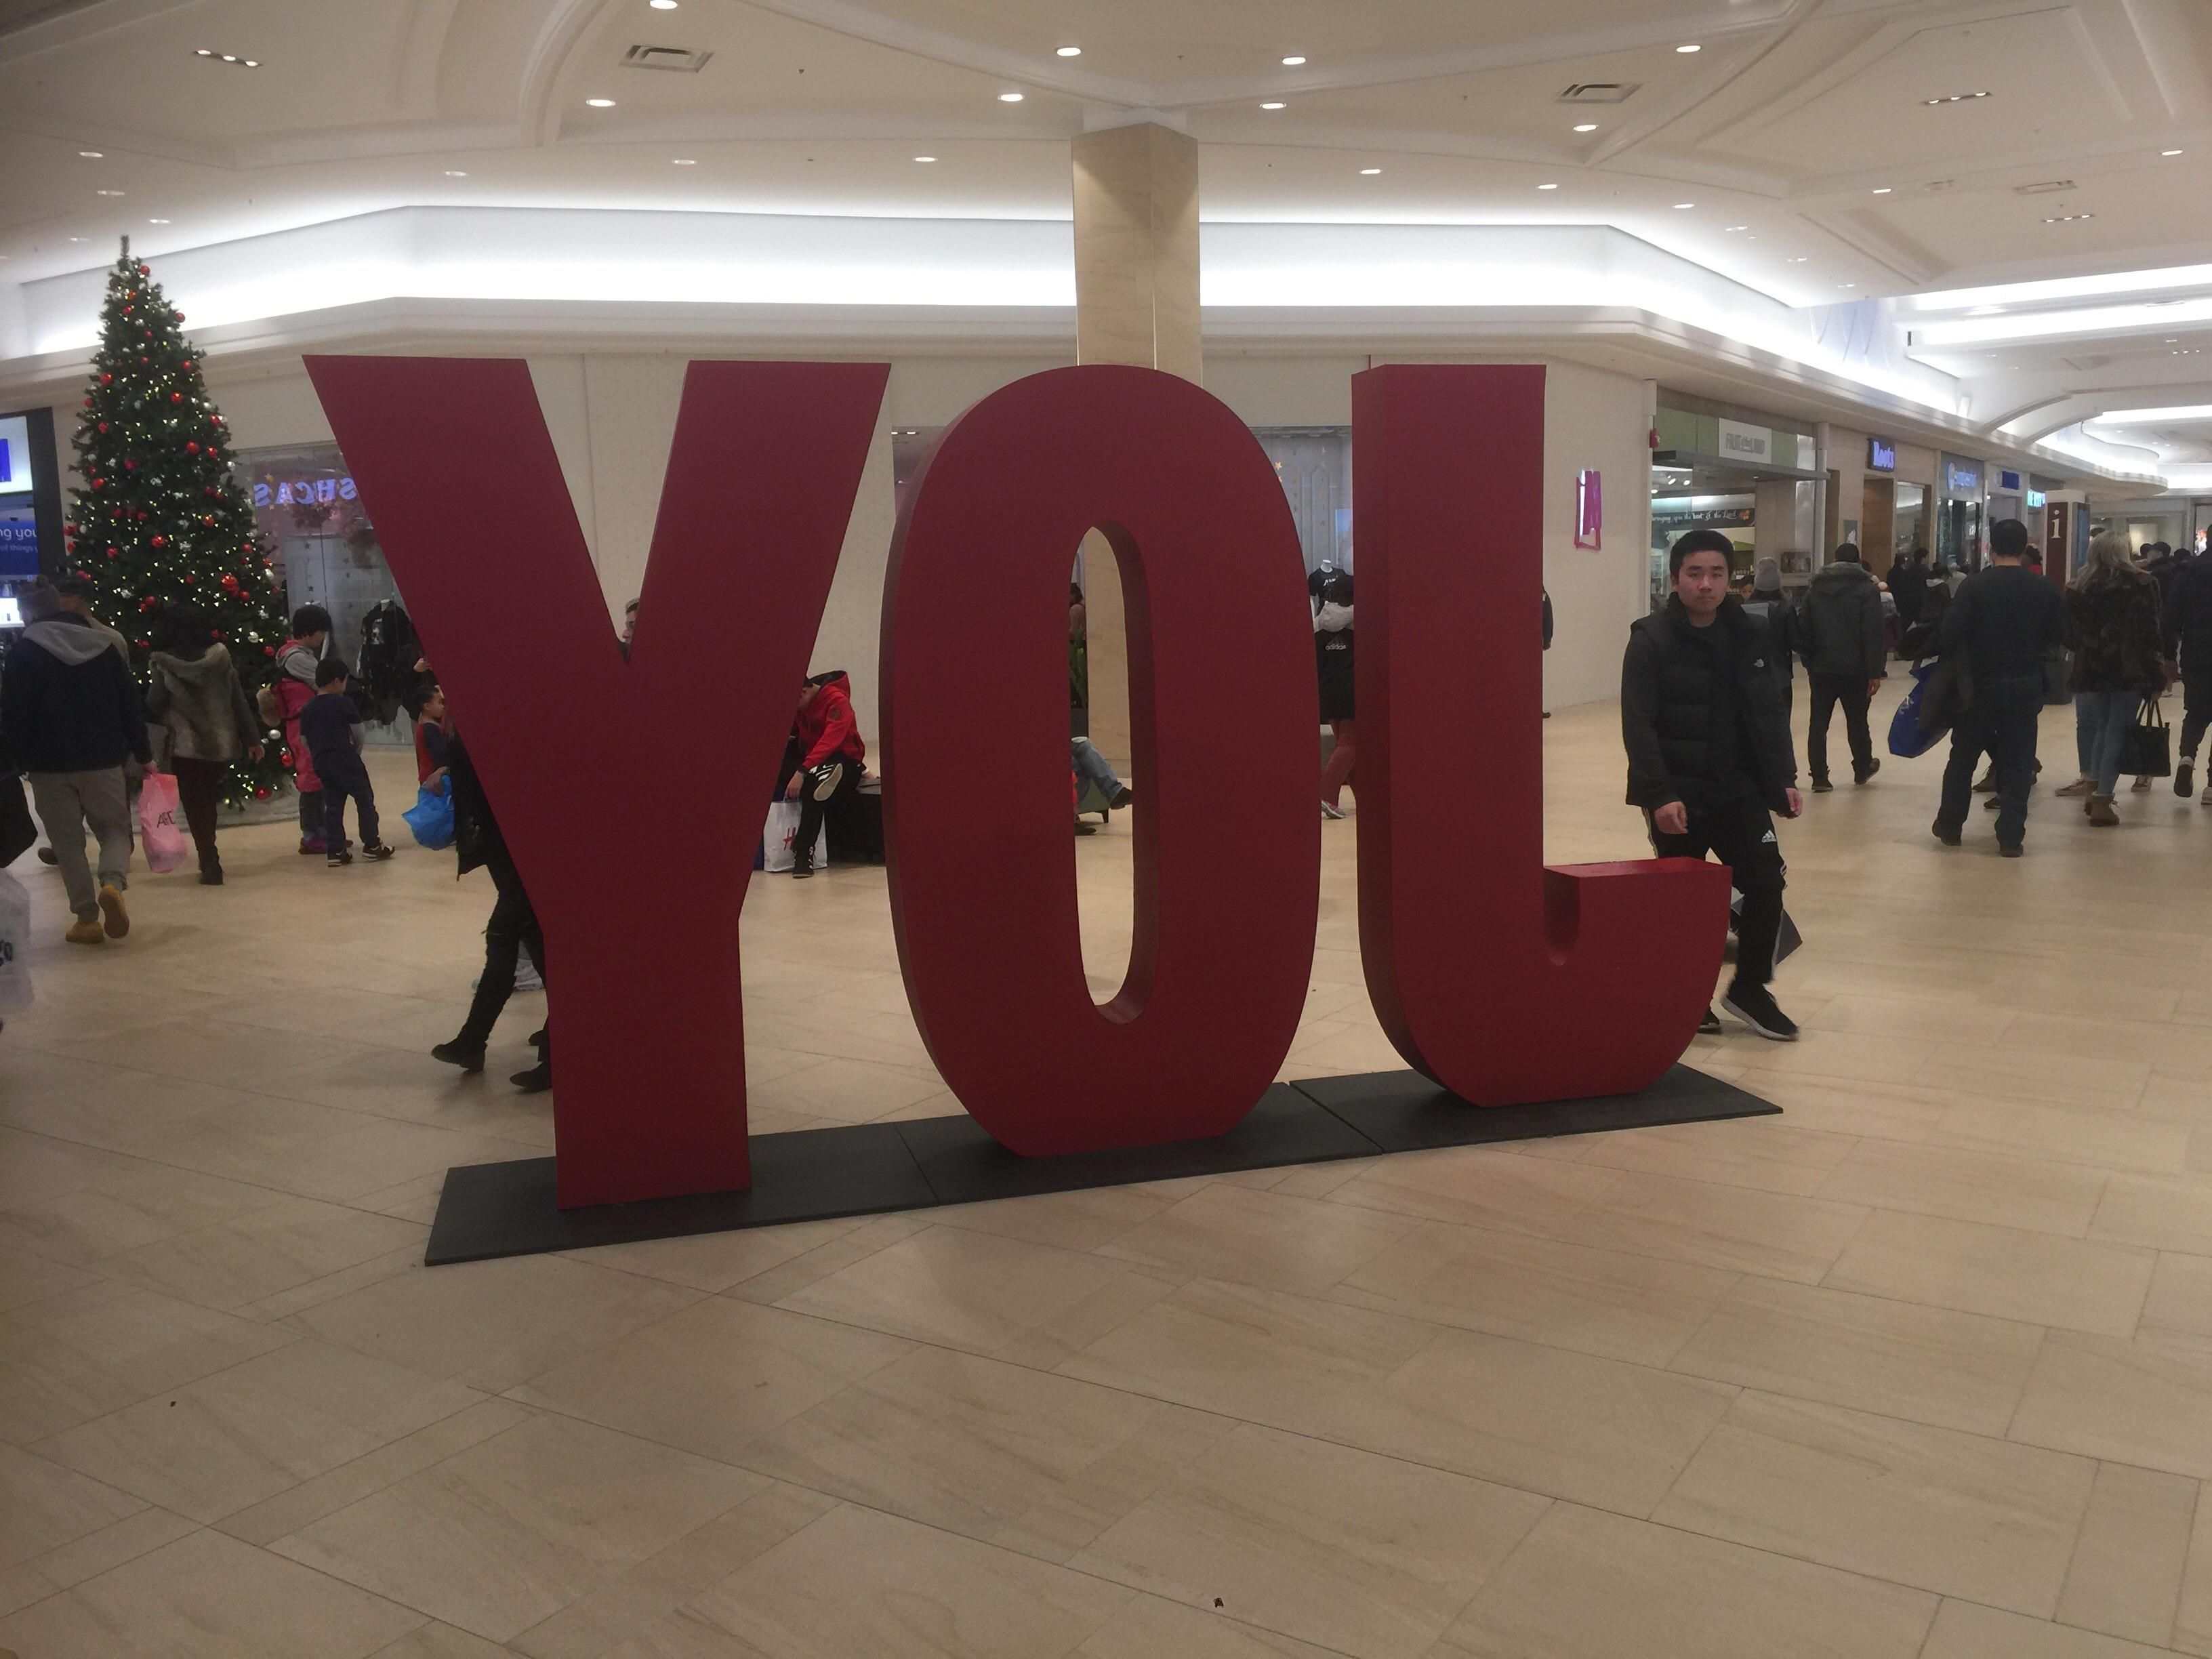 I thought someone broke this ‘YOU’ sign... my wife rolls her eyes and says’ it says JOY...’